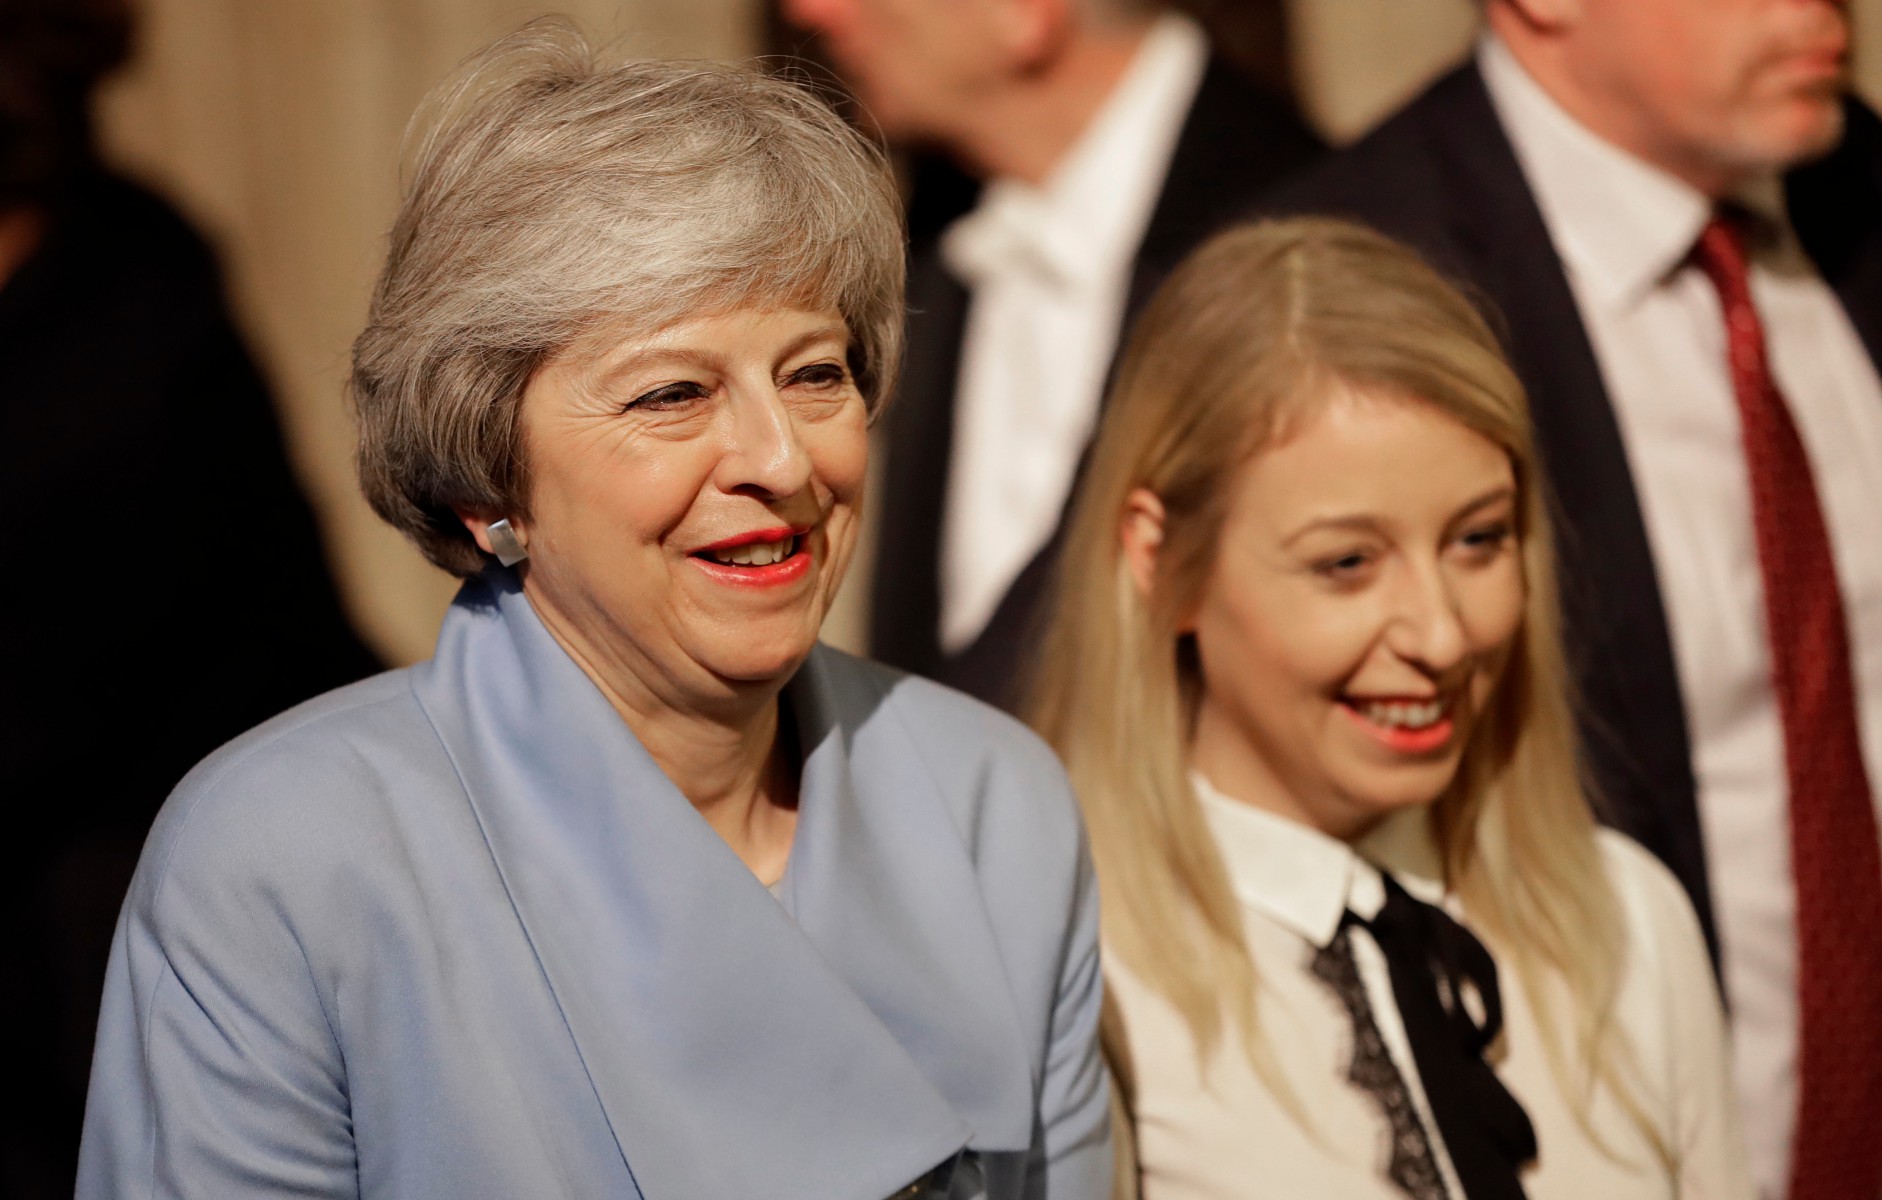 Theresa May was reelected as the Conservative MP for Maidenhead